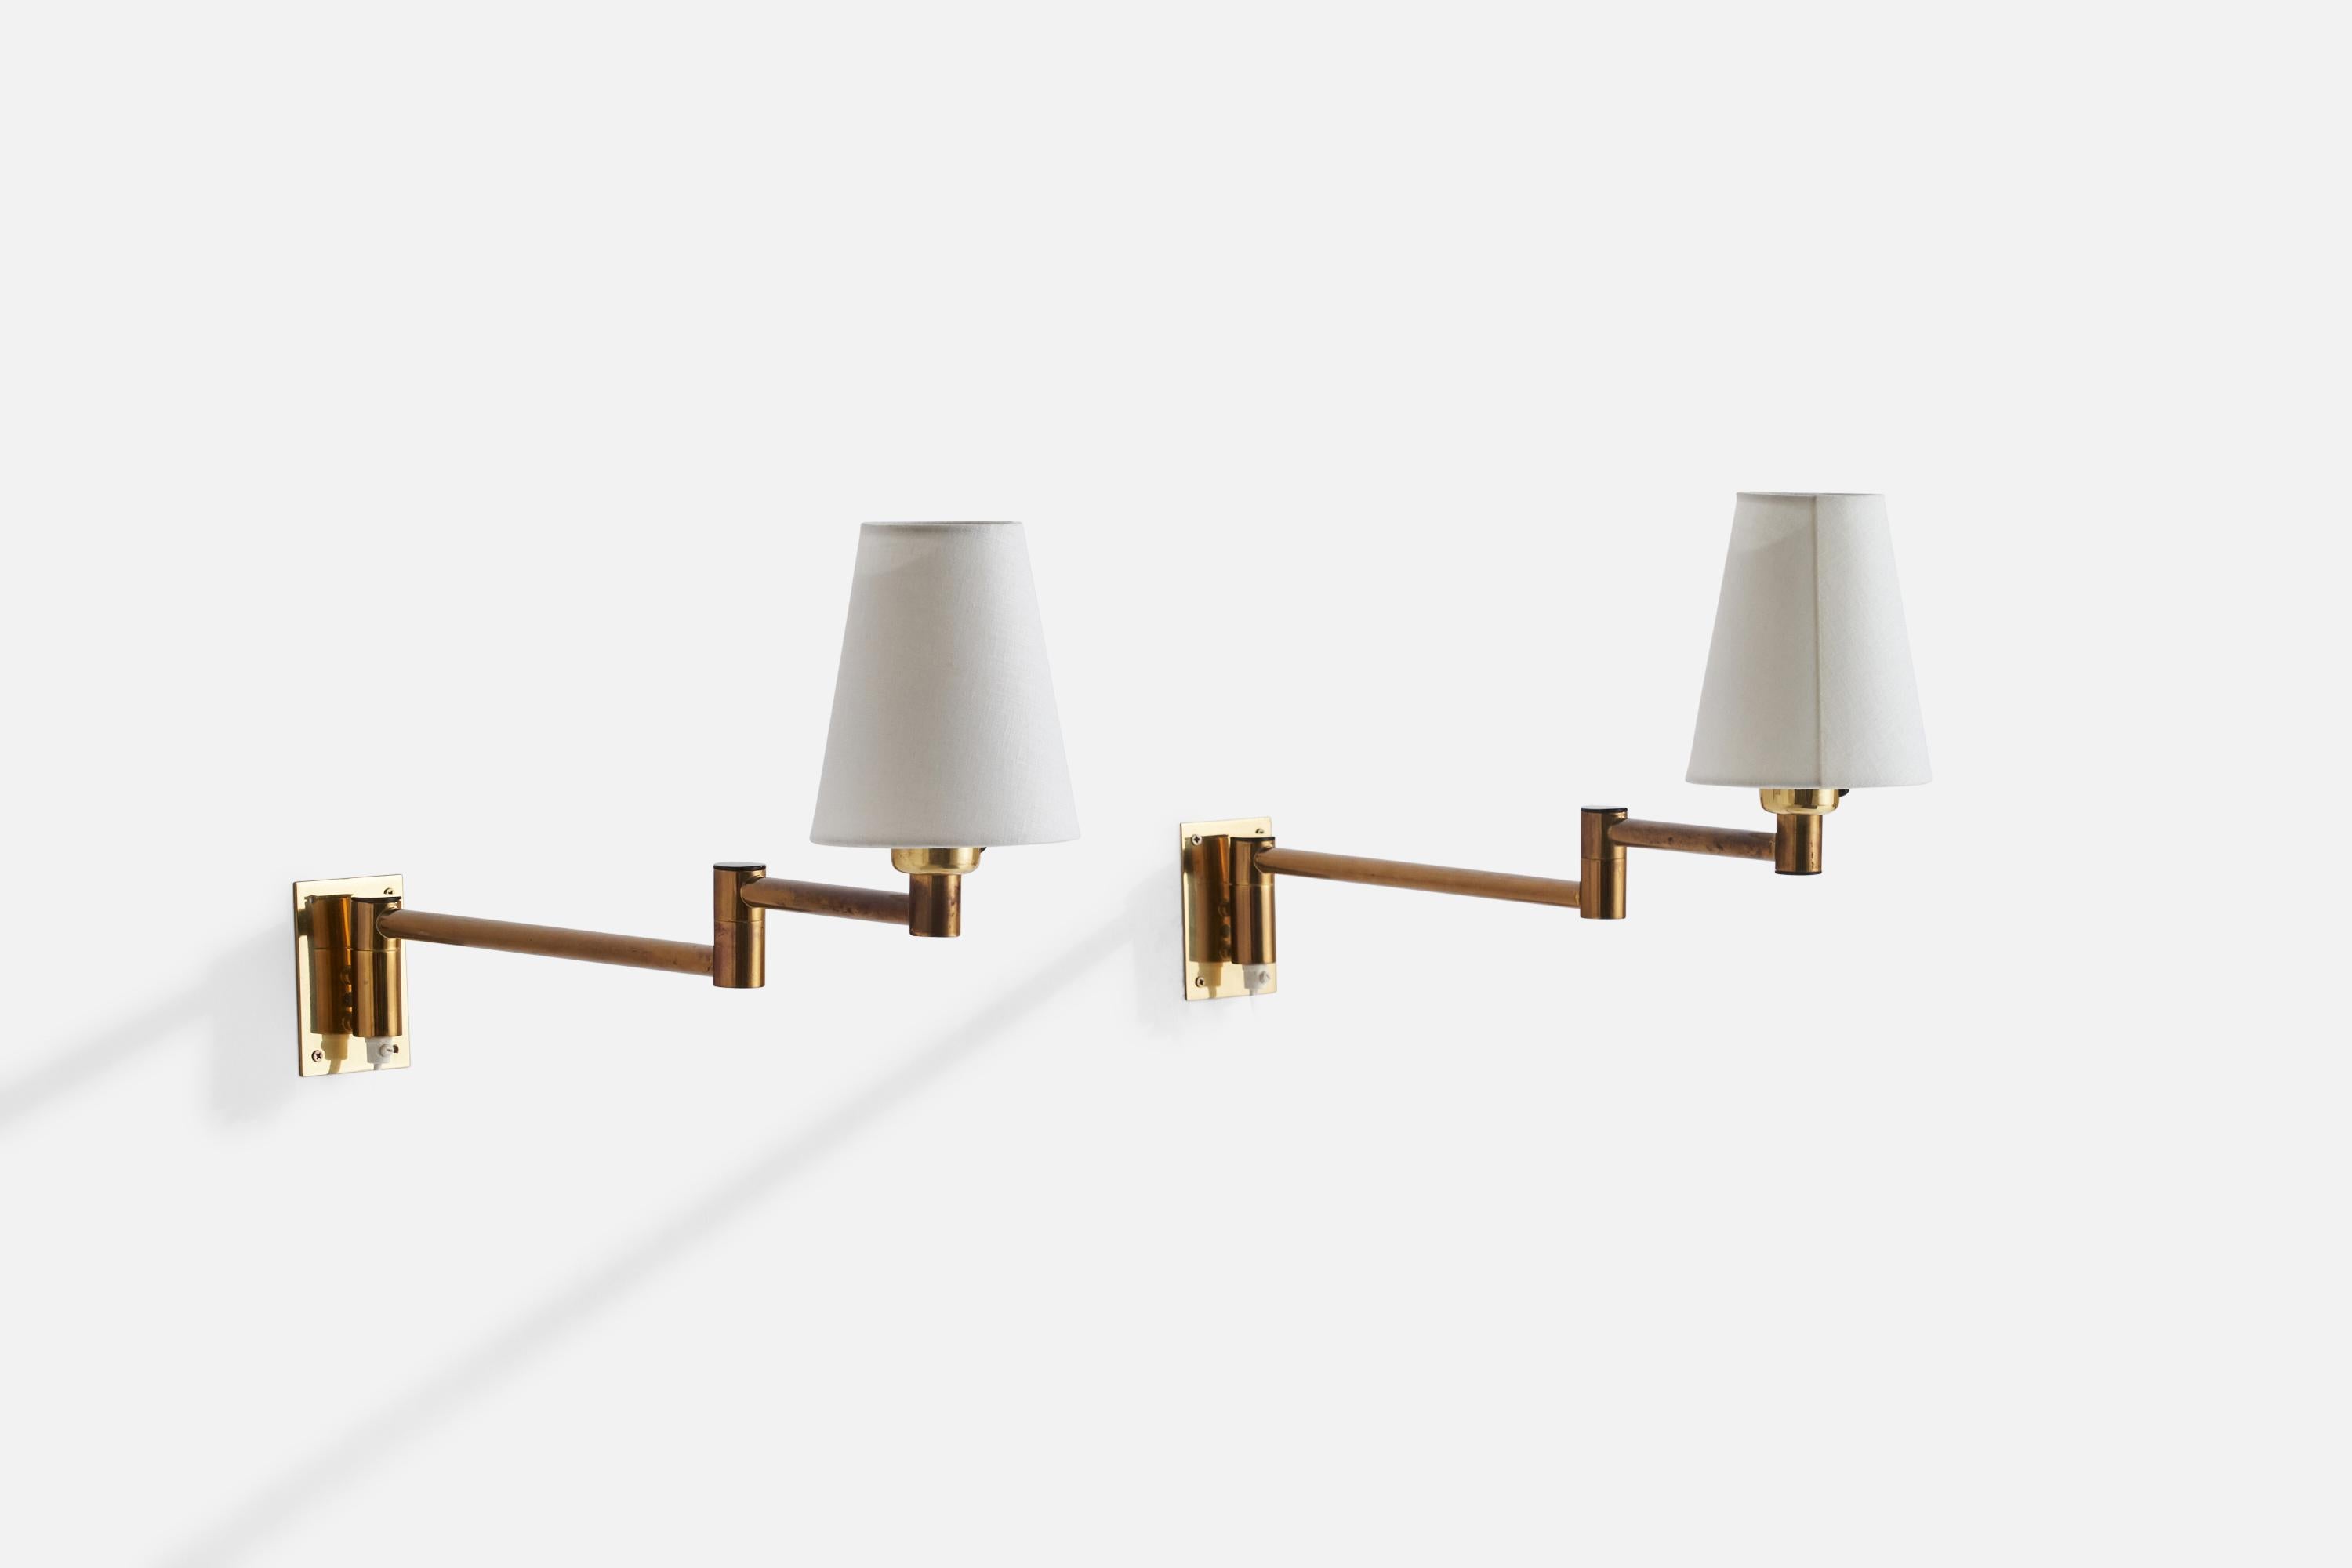 A pair of adjustable brass, plastic and white fabric wall lights designed and produced by Fagerhults Belysning, Sweden, 1980s.

Overall Dimensions (inches): 8”  H x 11.5”  W x 18” D
Back Plate Dimensions (inches): 4”  H x 2.75”  W x .25”  D
Bulb